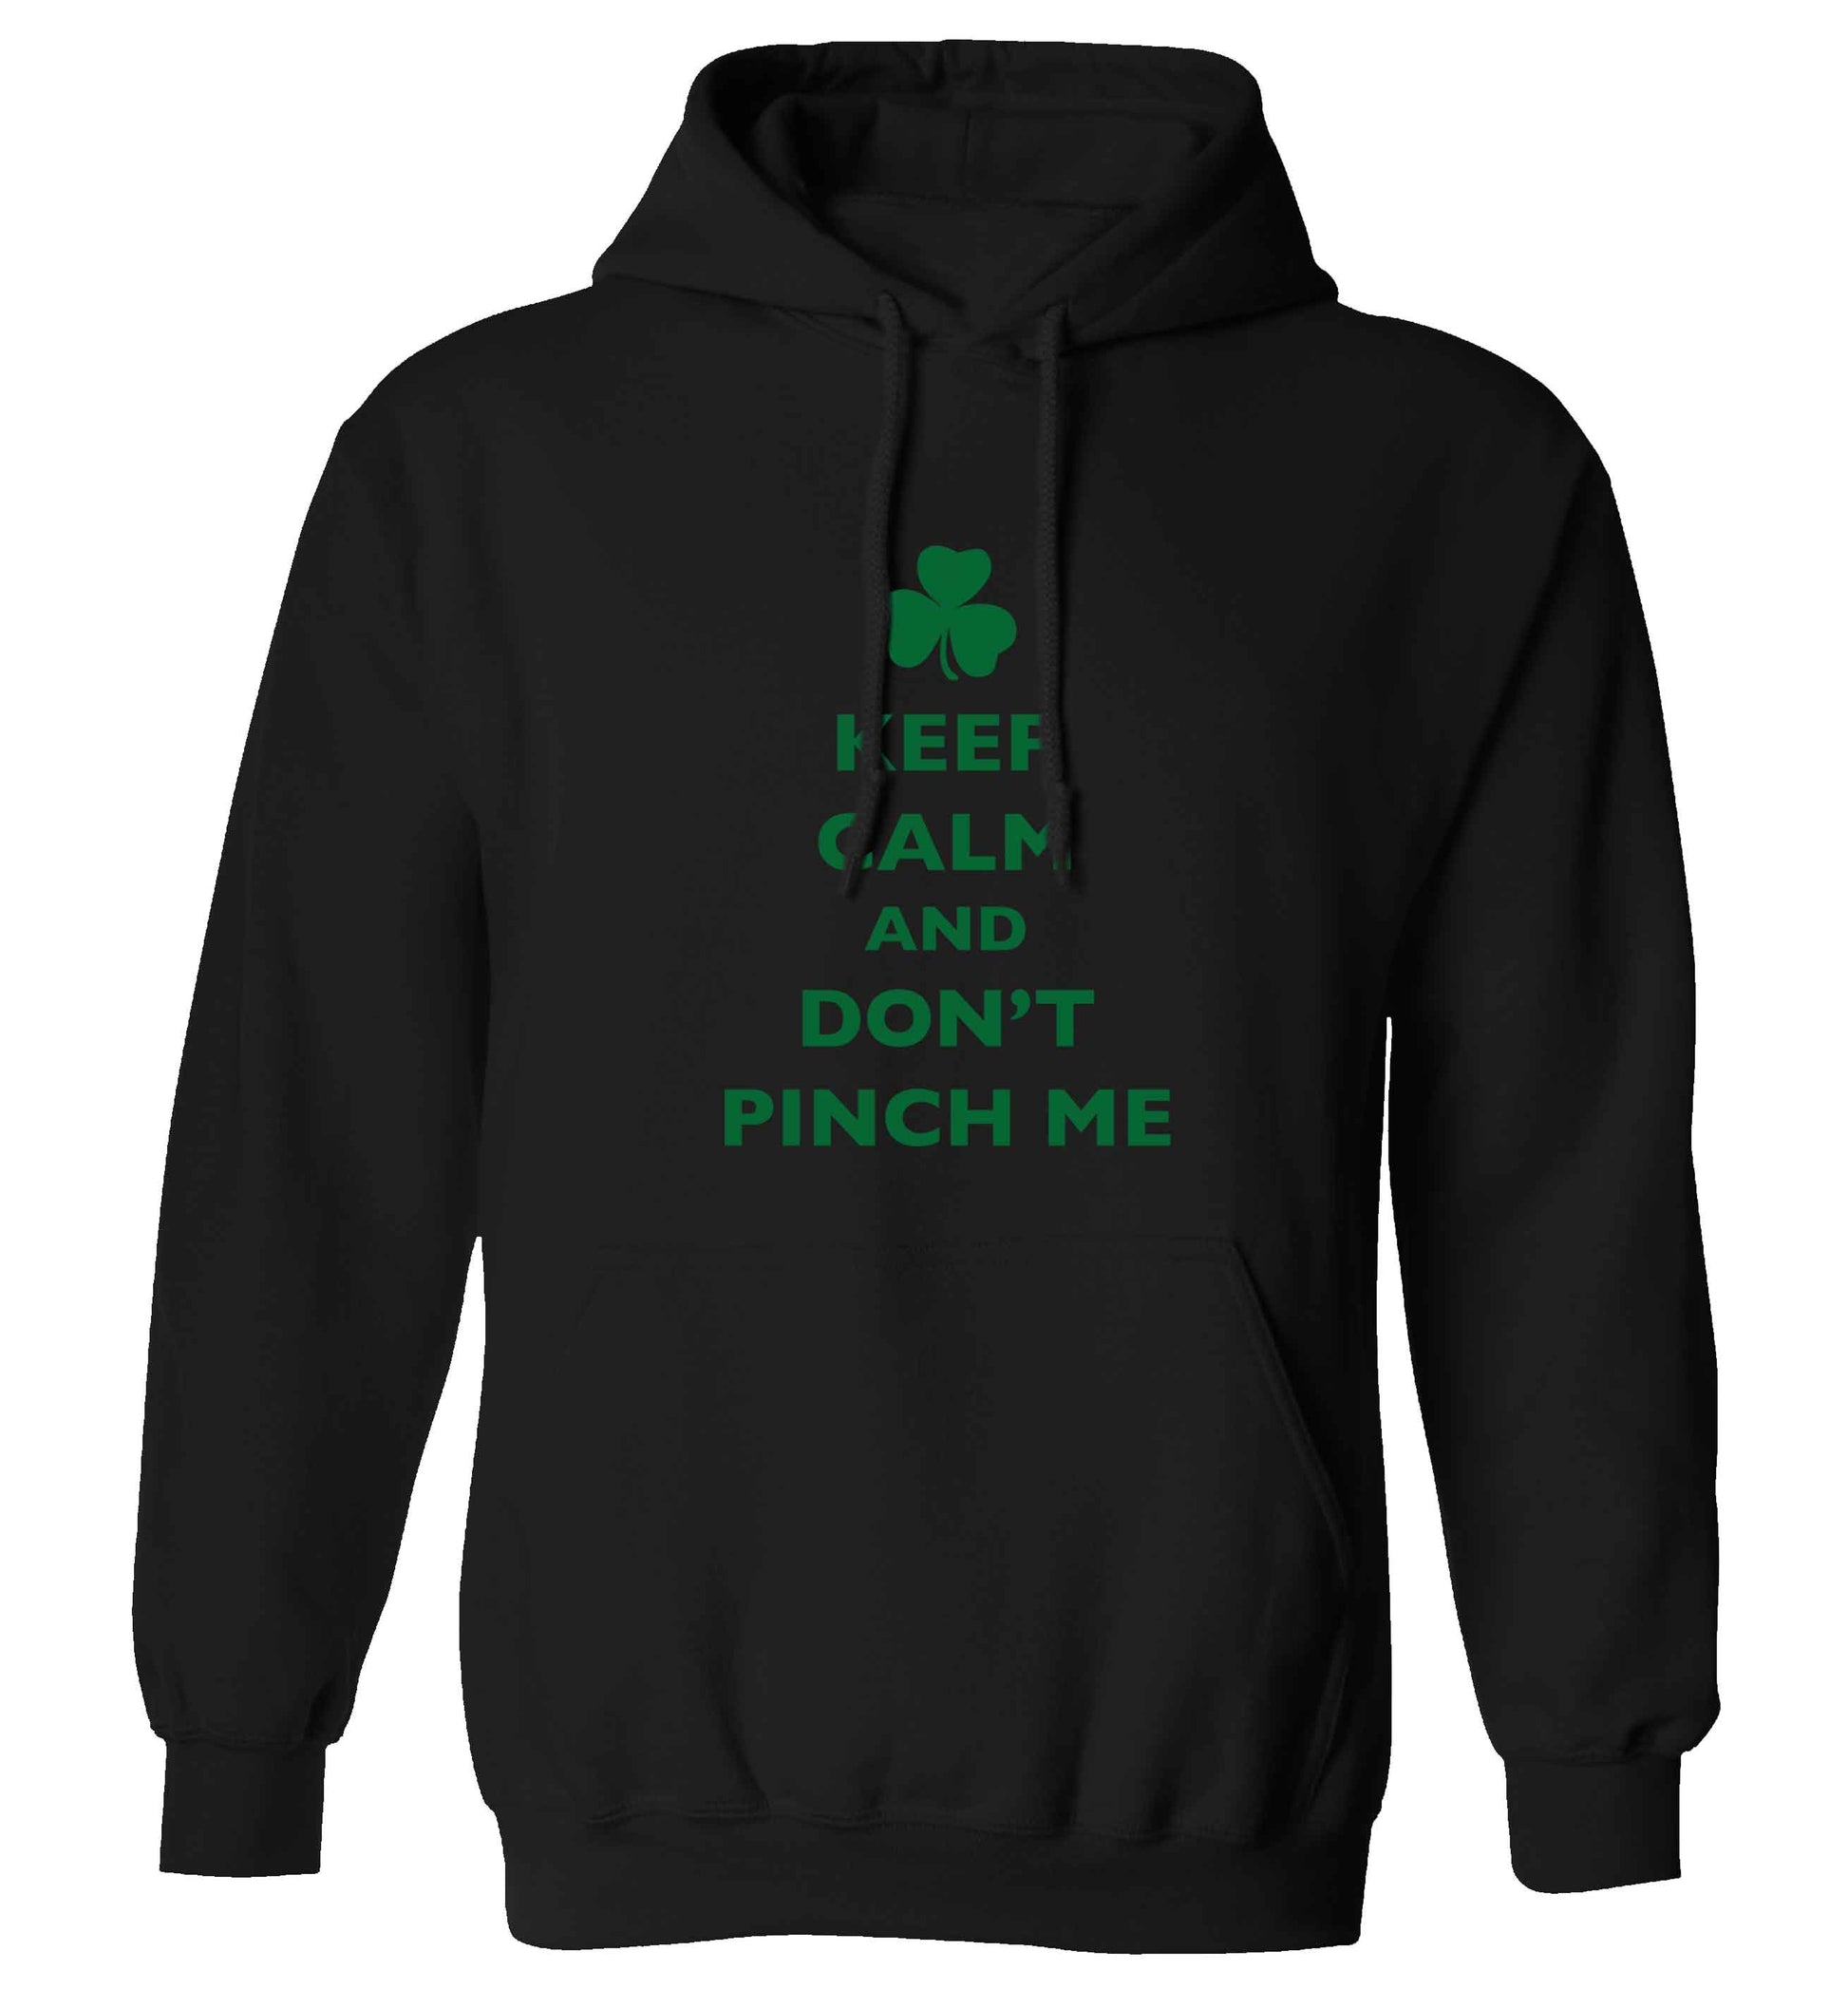 Keep calm and don't pinch me adults unisex black hoodie 2XL